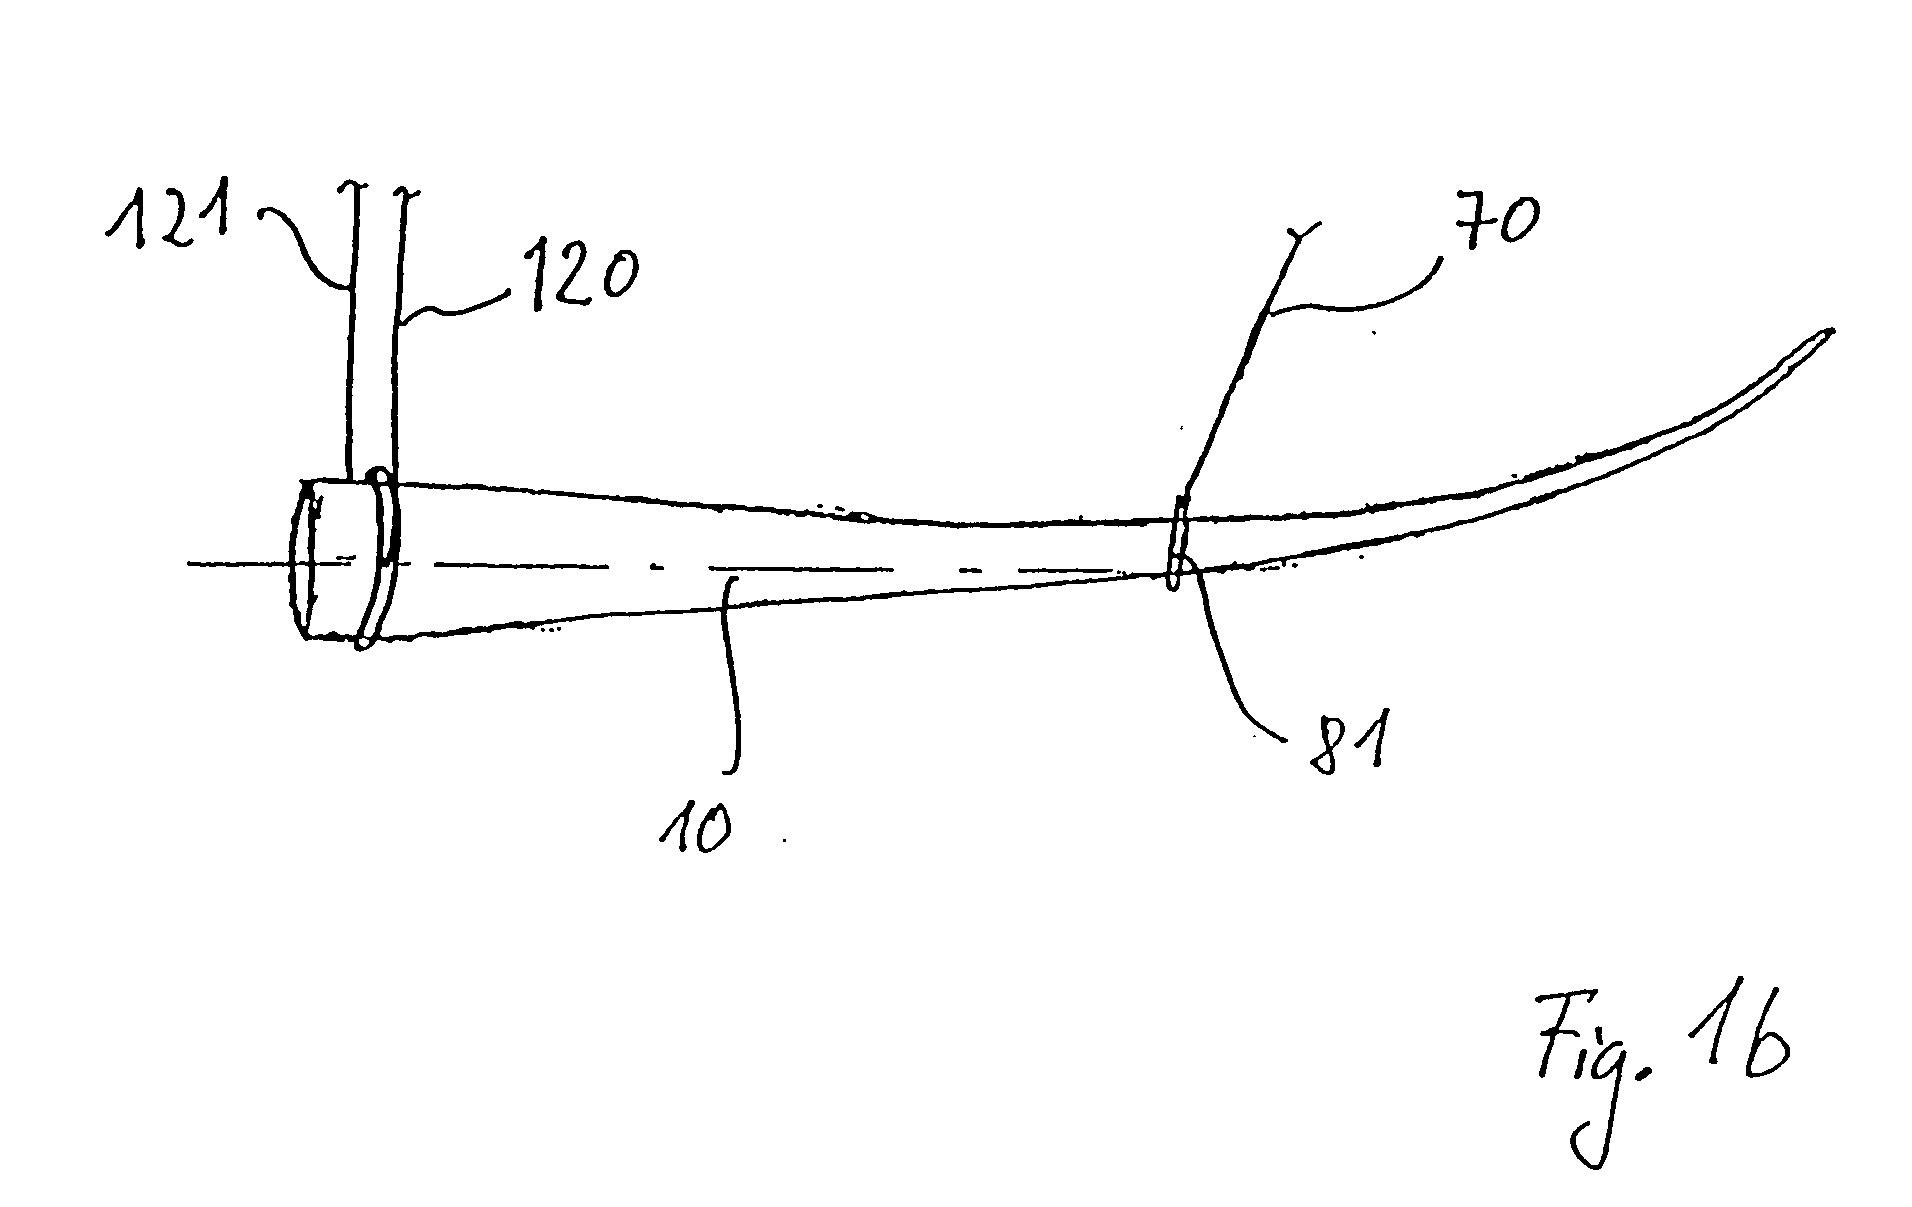 Device and Method for Mounting and Dismantling a Component of a Wind Turbine